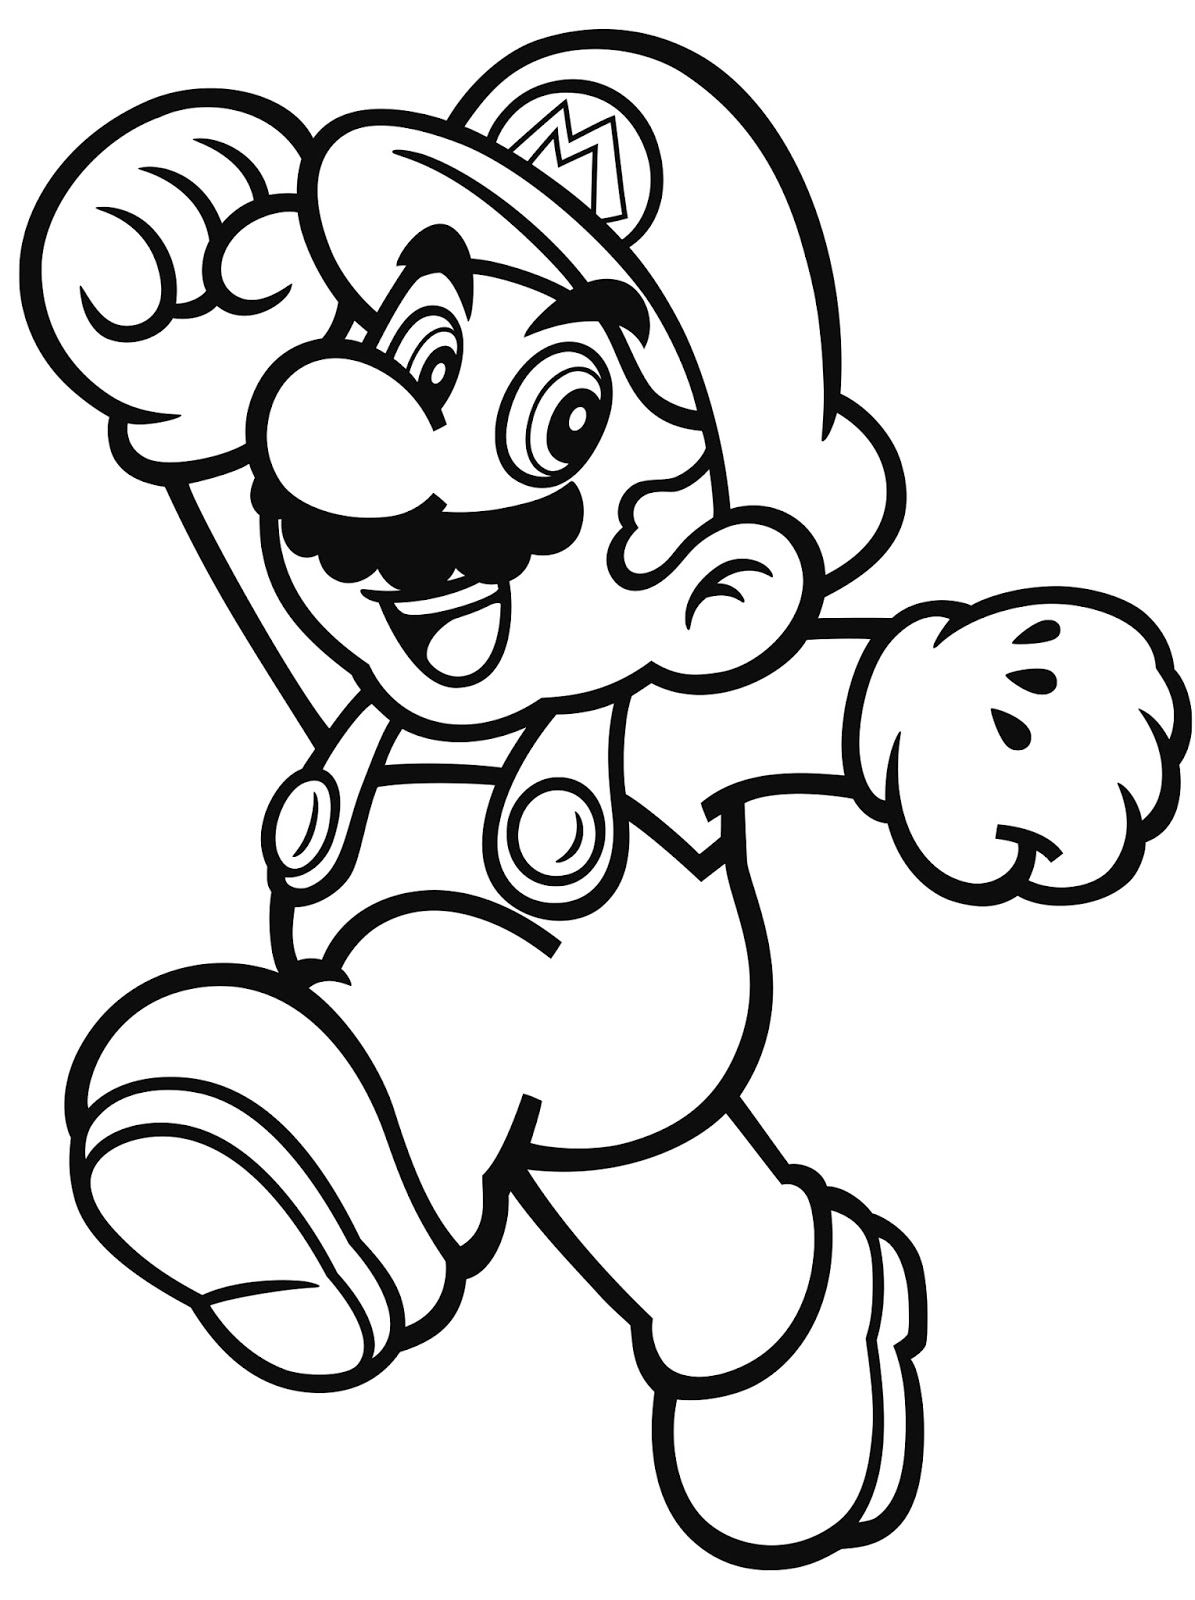 super mario brothers coloring pages